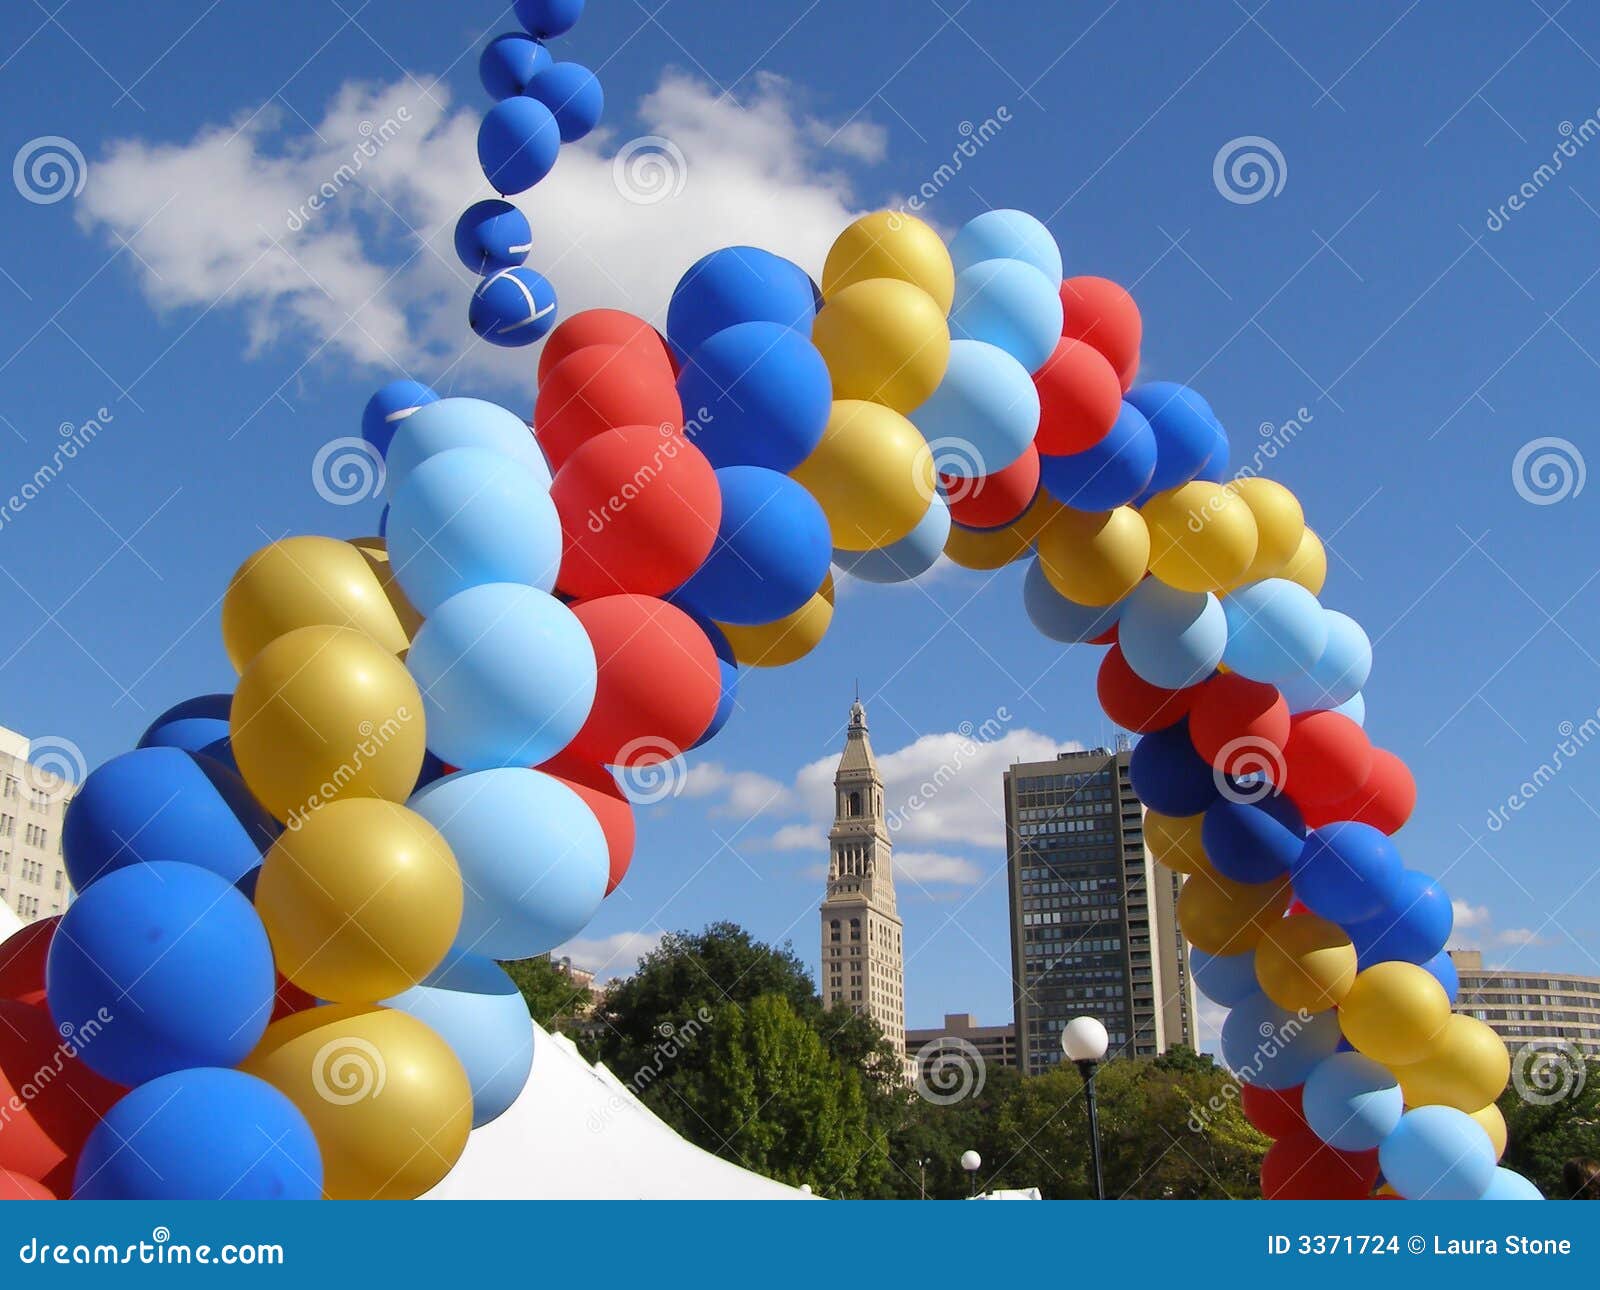 506 Balloon Arch Photos Free Royalty Free Stock Photos From Dreamstime